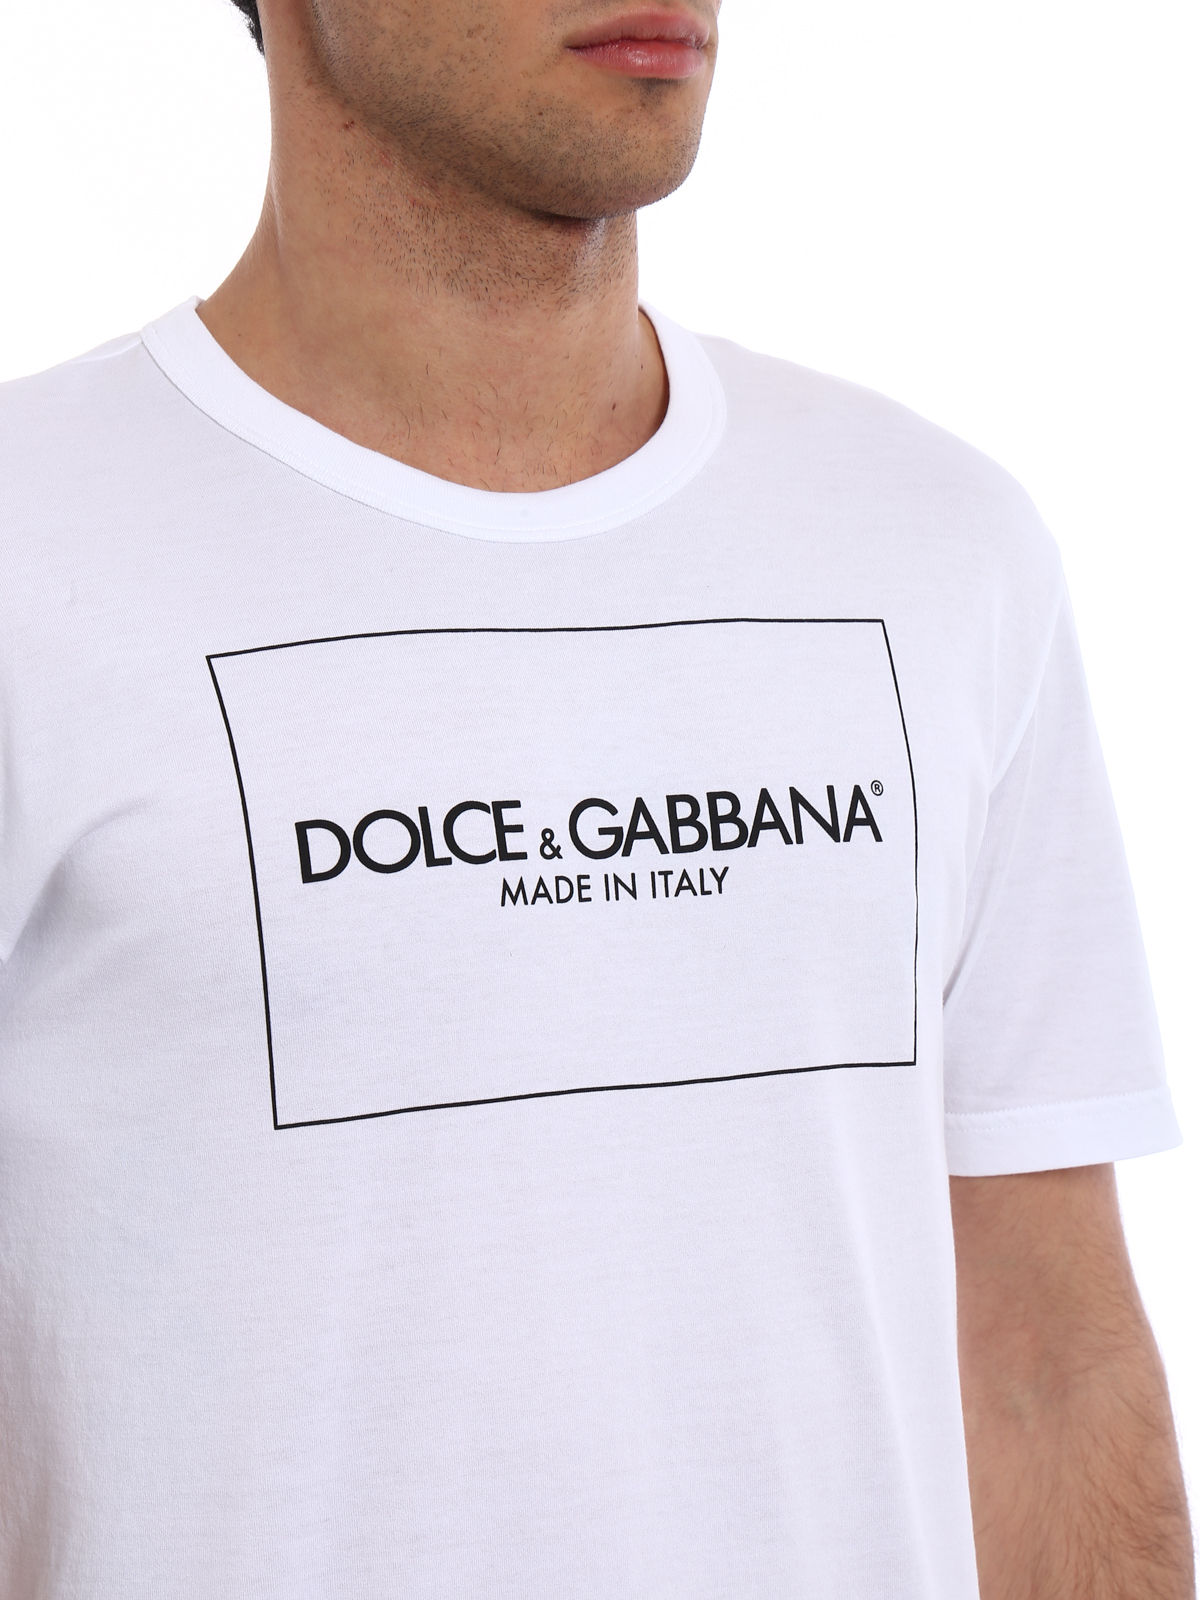 Camisas Dolce Gabbana - - D&G Made In Italy - G8IA8TFH7EDHWL94